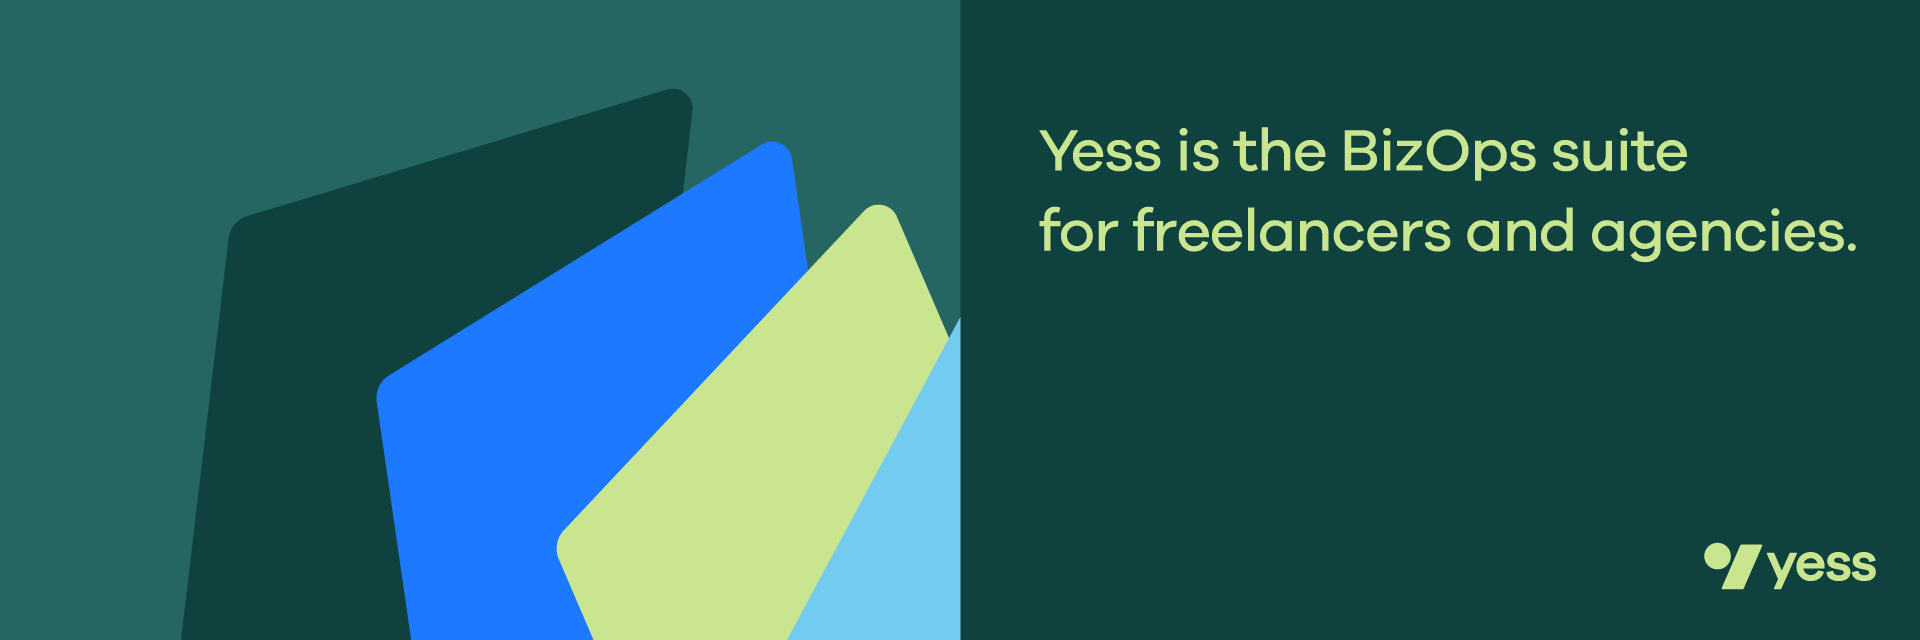 Yess is the BizOps suite for freelnacers and agencies